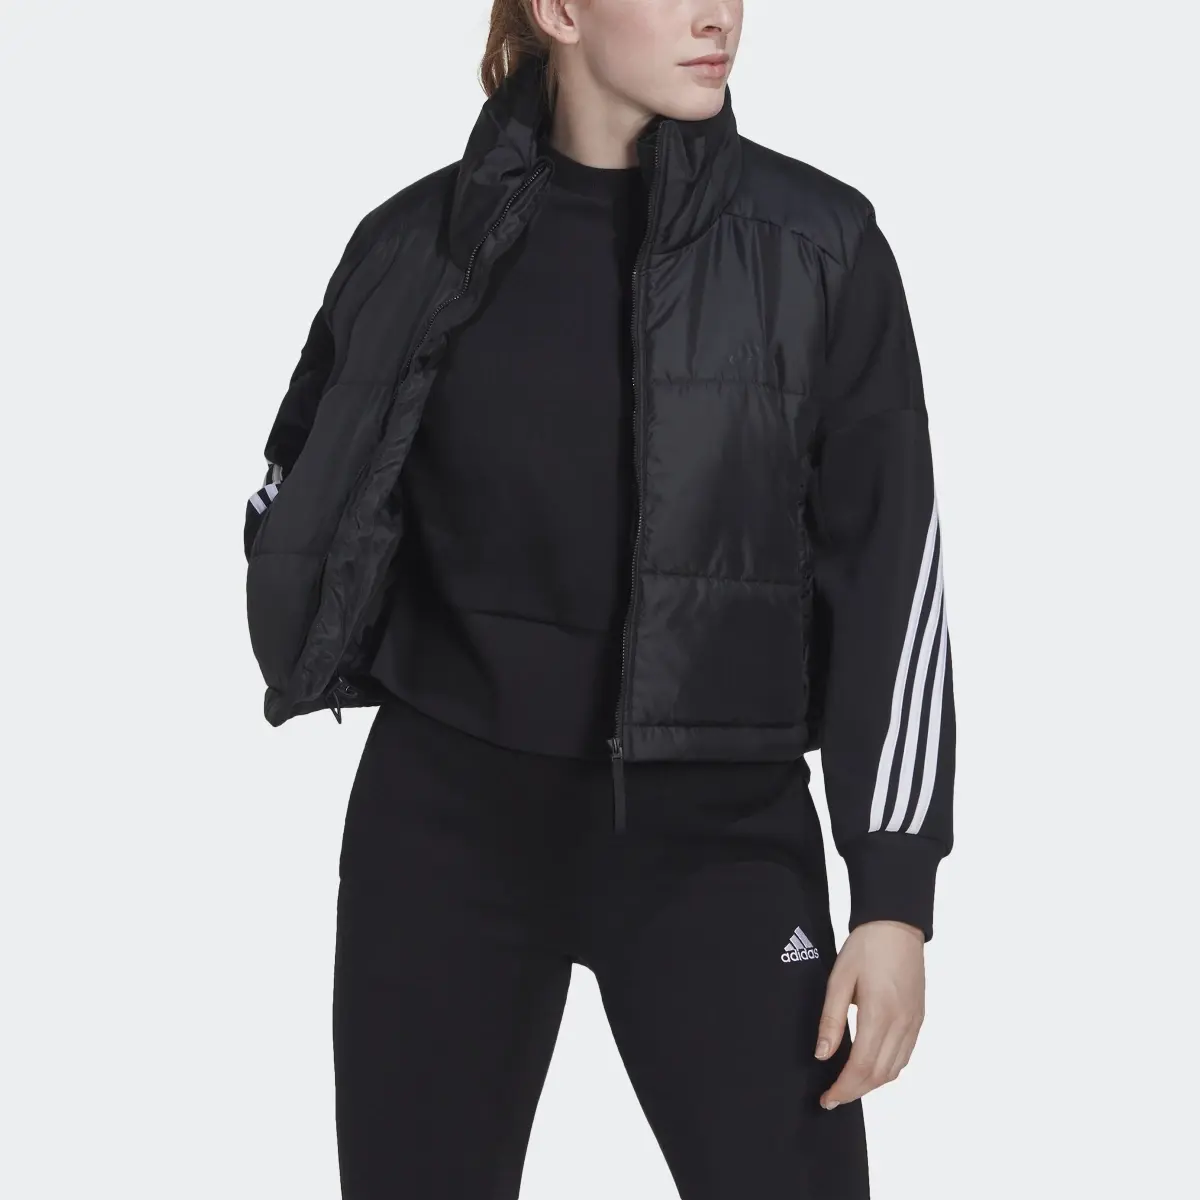 Adidas 3-Stripes Insulated Vest. 1